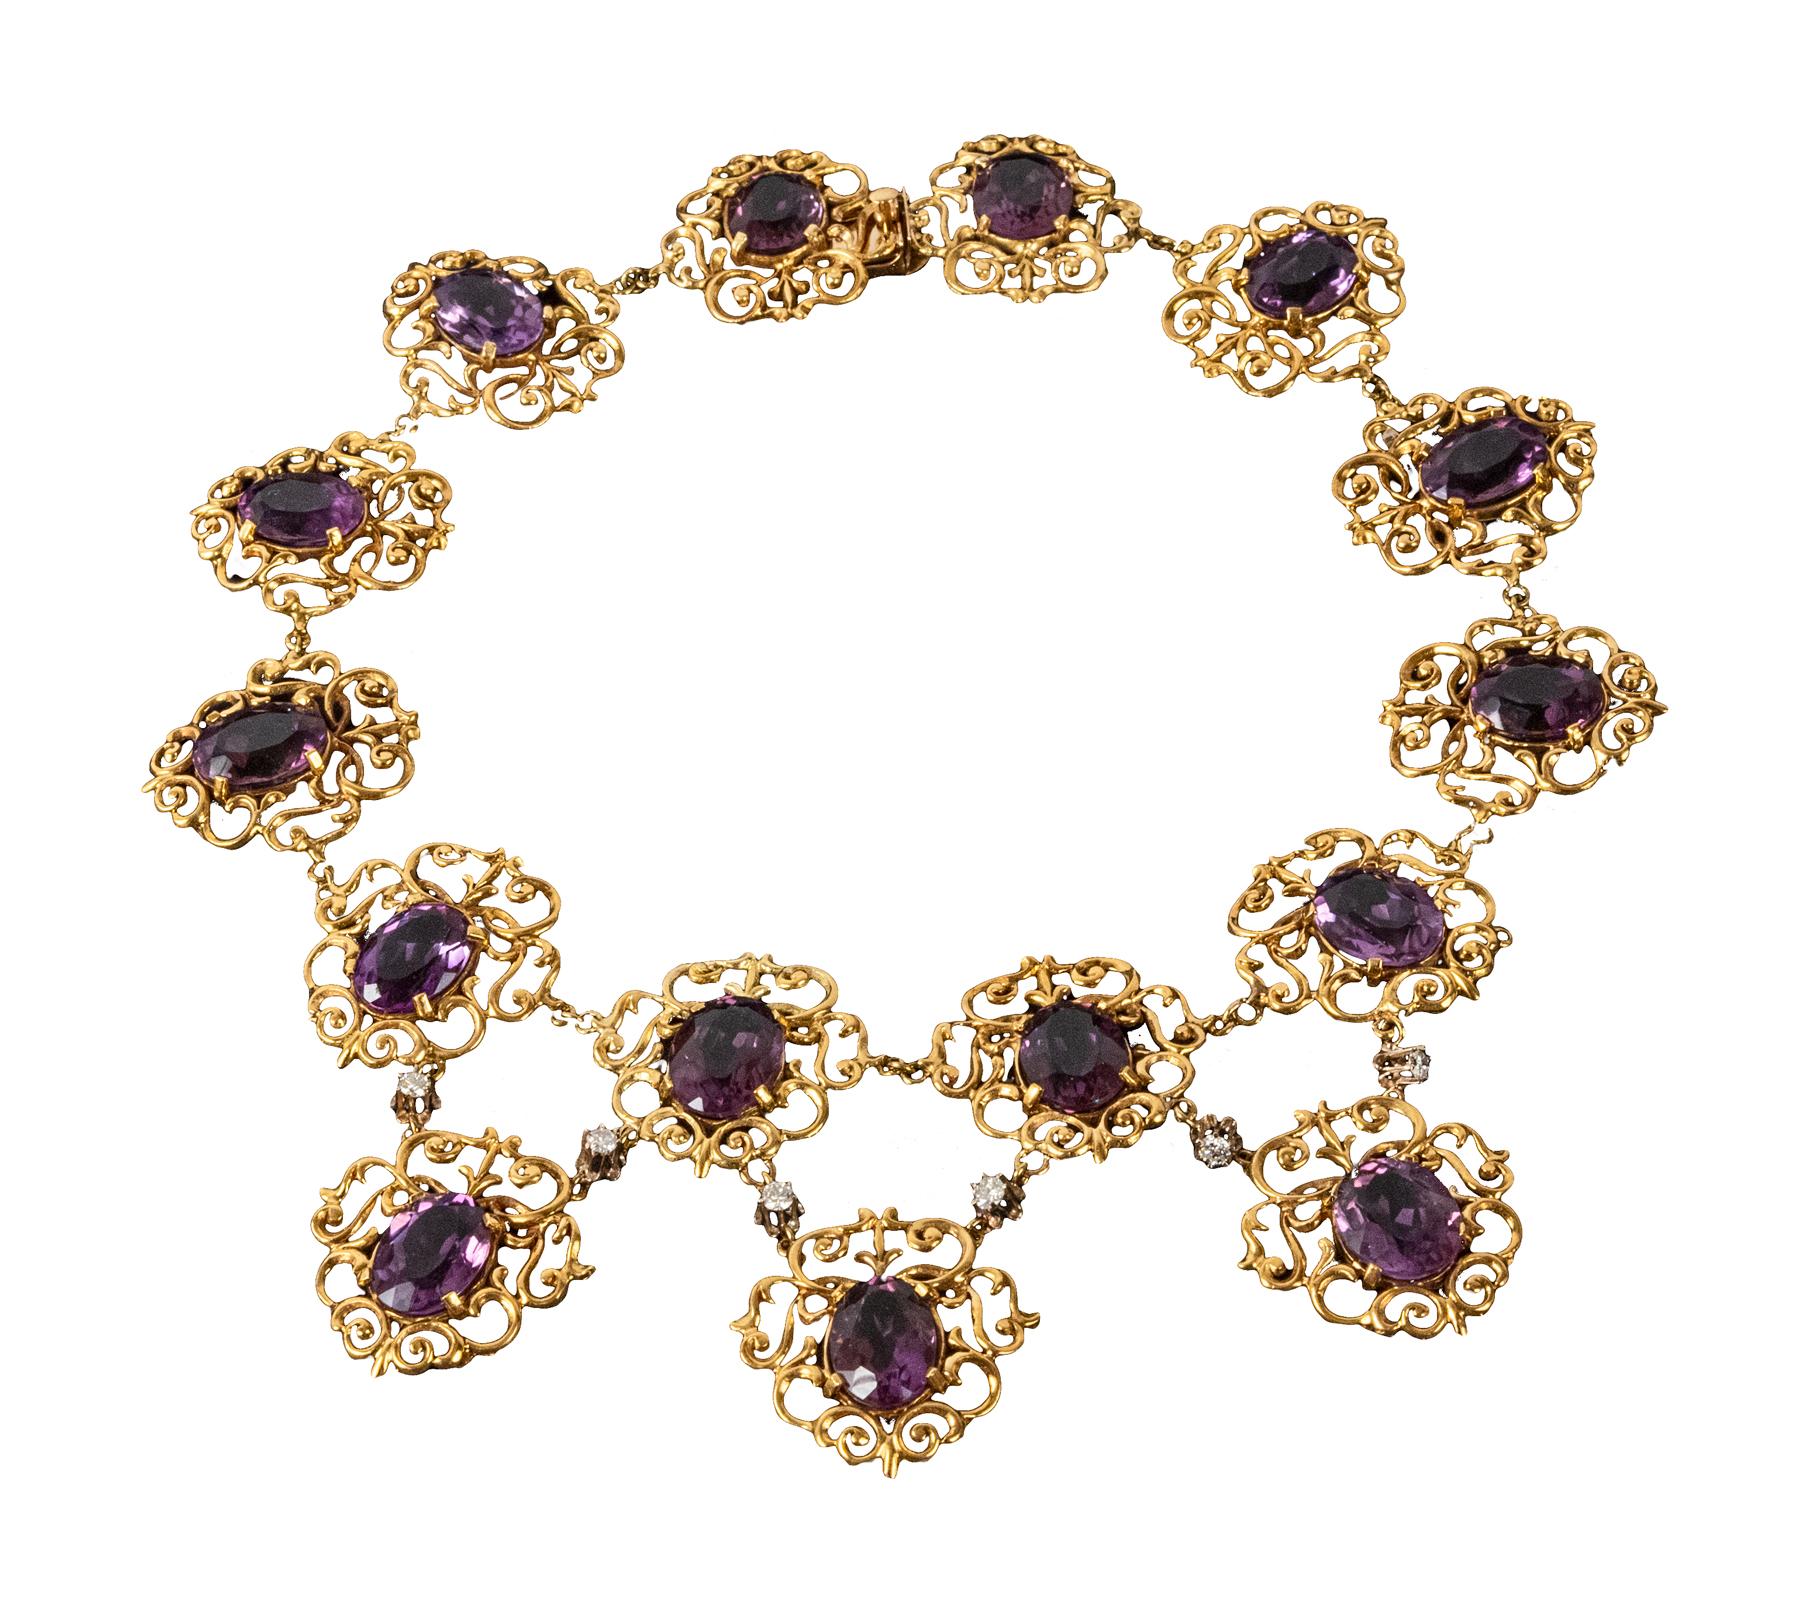 Ladies 18 karat yellow gold, amethyst and diamond necklace. Comprised of fifteen beautifully-matched large oval faceted amethysts set in filigree cartouches, three of which are suspended by links set with diamonds.